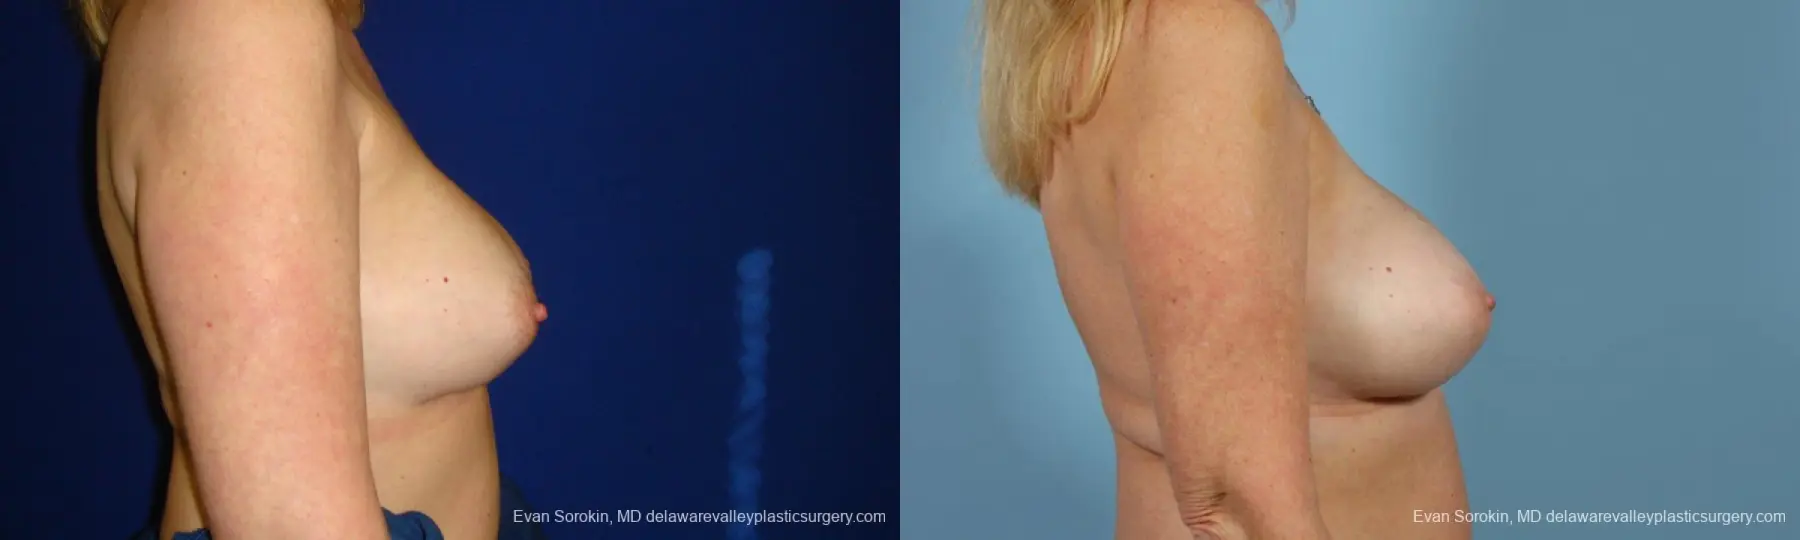 Philadelphia Breast Augmentation 9457 - Before and After 5